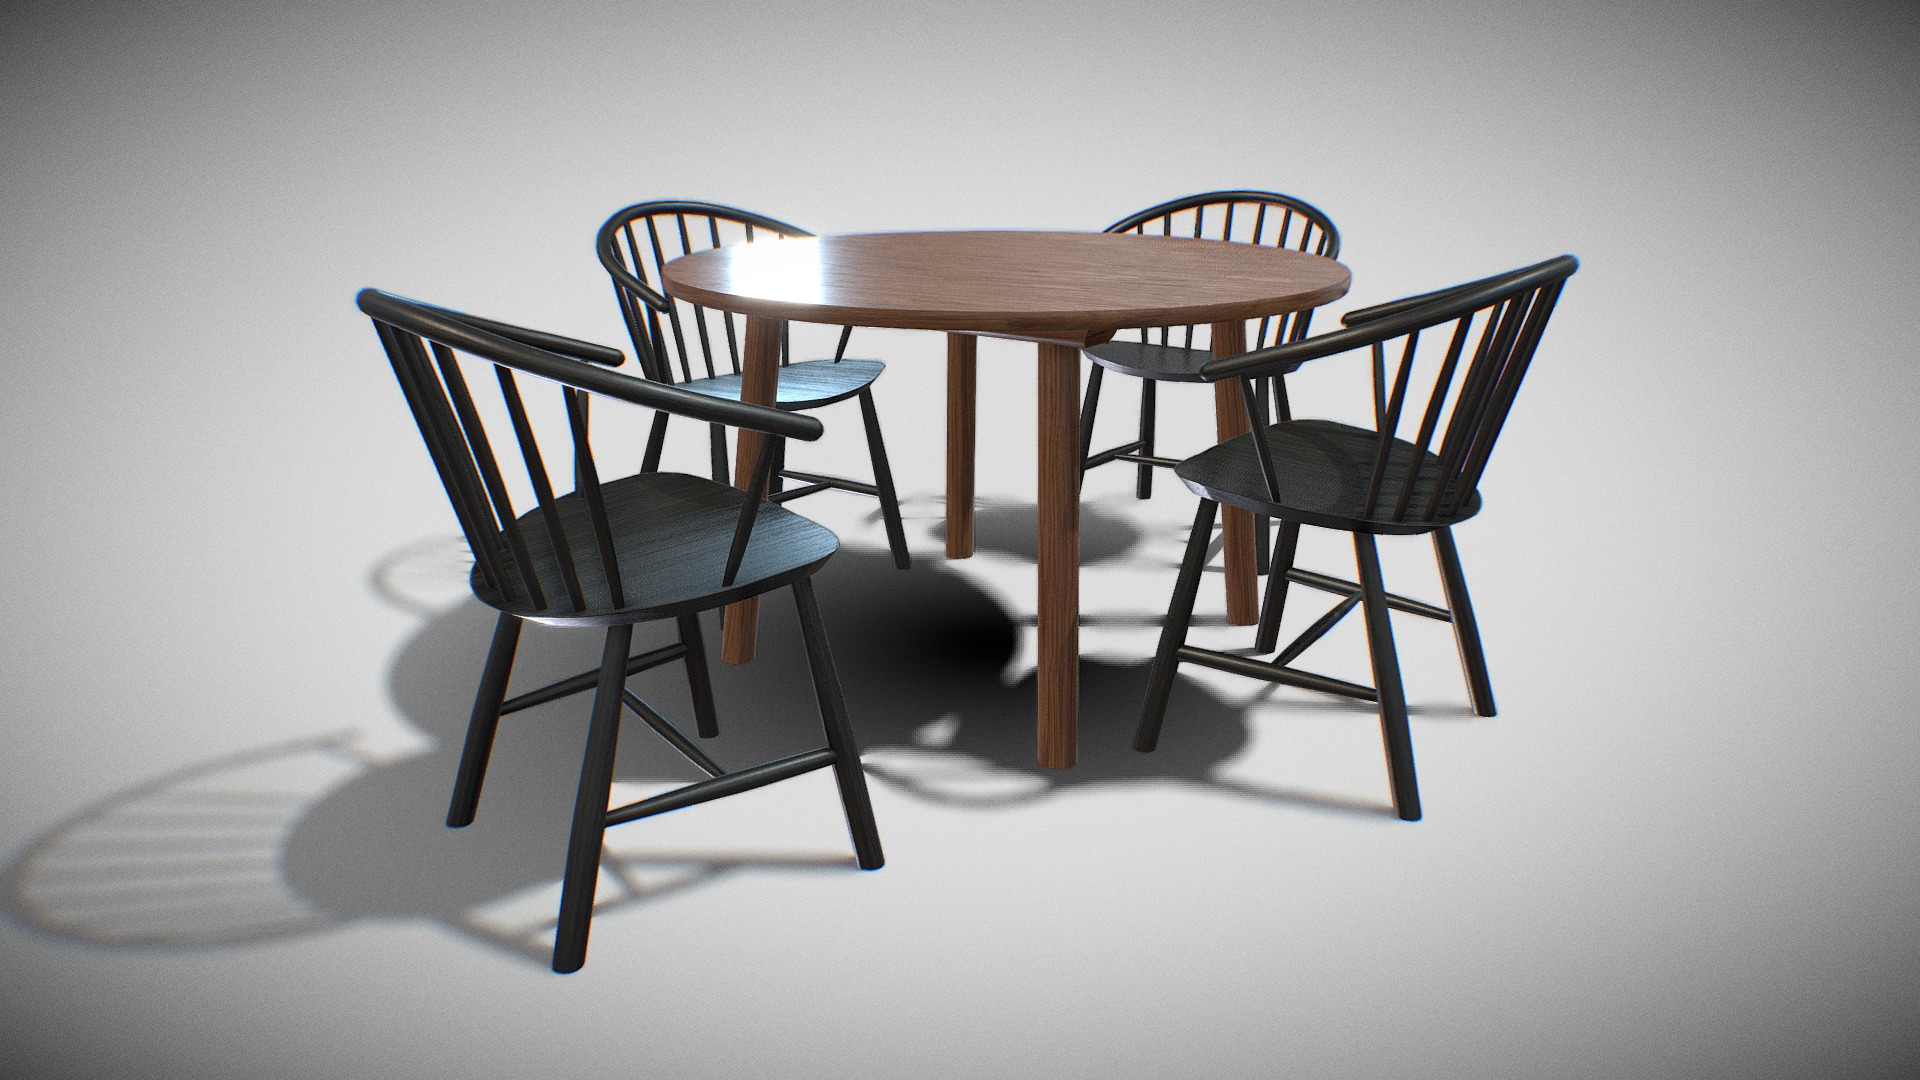 3D model DiningSet V-03-Taro Table and JohanssonJ64 Chair - This is a 3D model of the DiningSet V-03-Taro Table and JohanssonJ64 Chair. The 3D model is about a table and chairs.